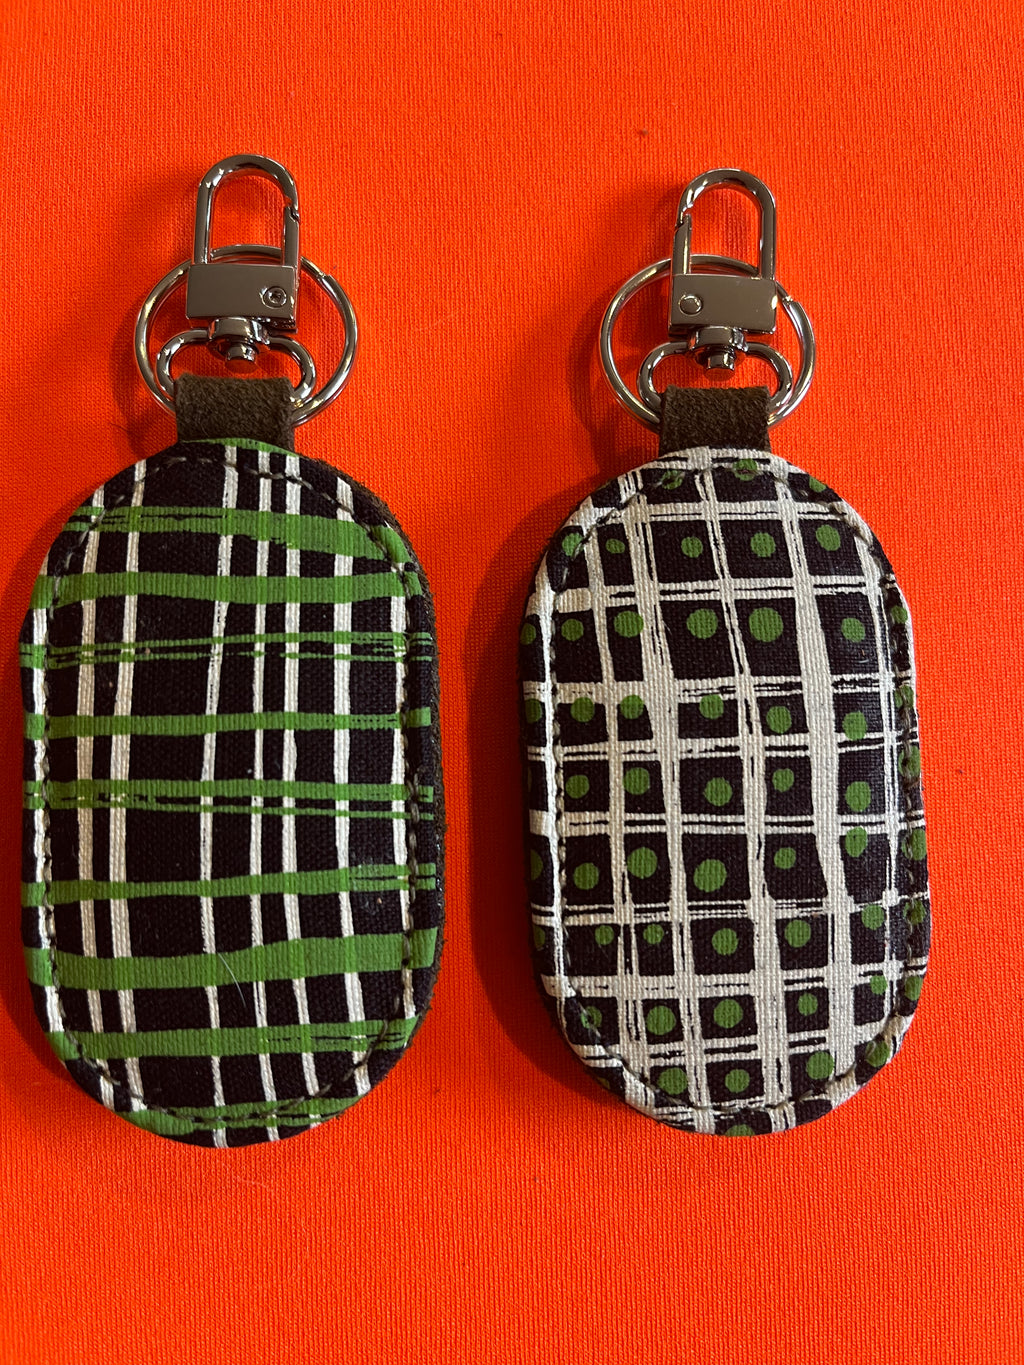 Key Fobs in various silk screen textiles from northern Australian Aboriginal artists